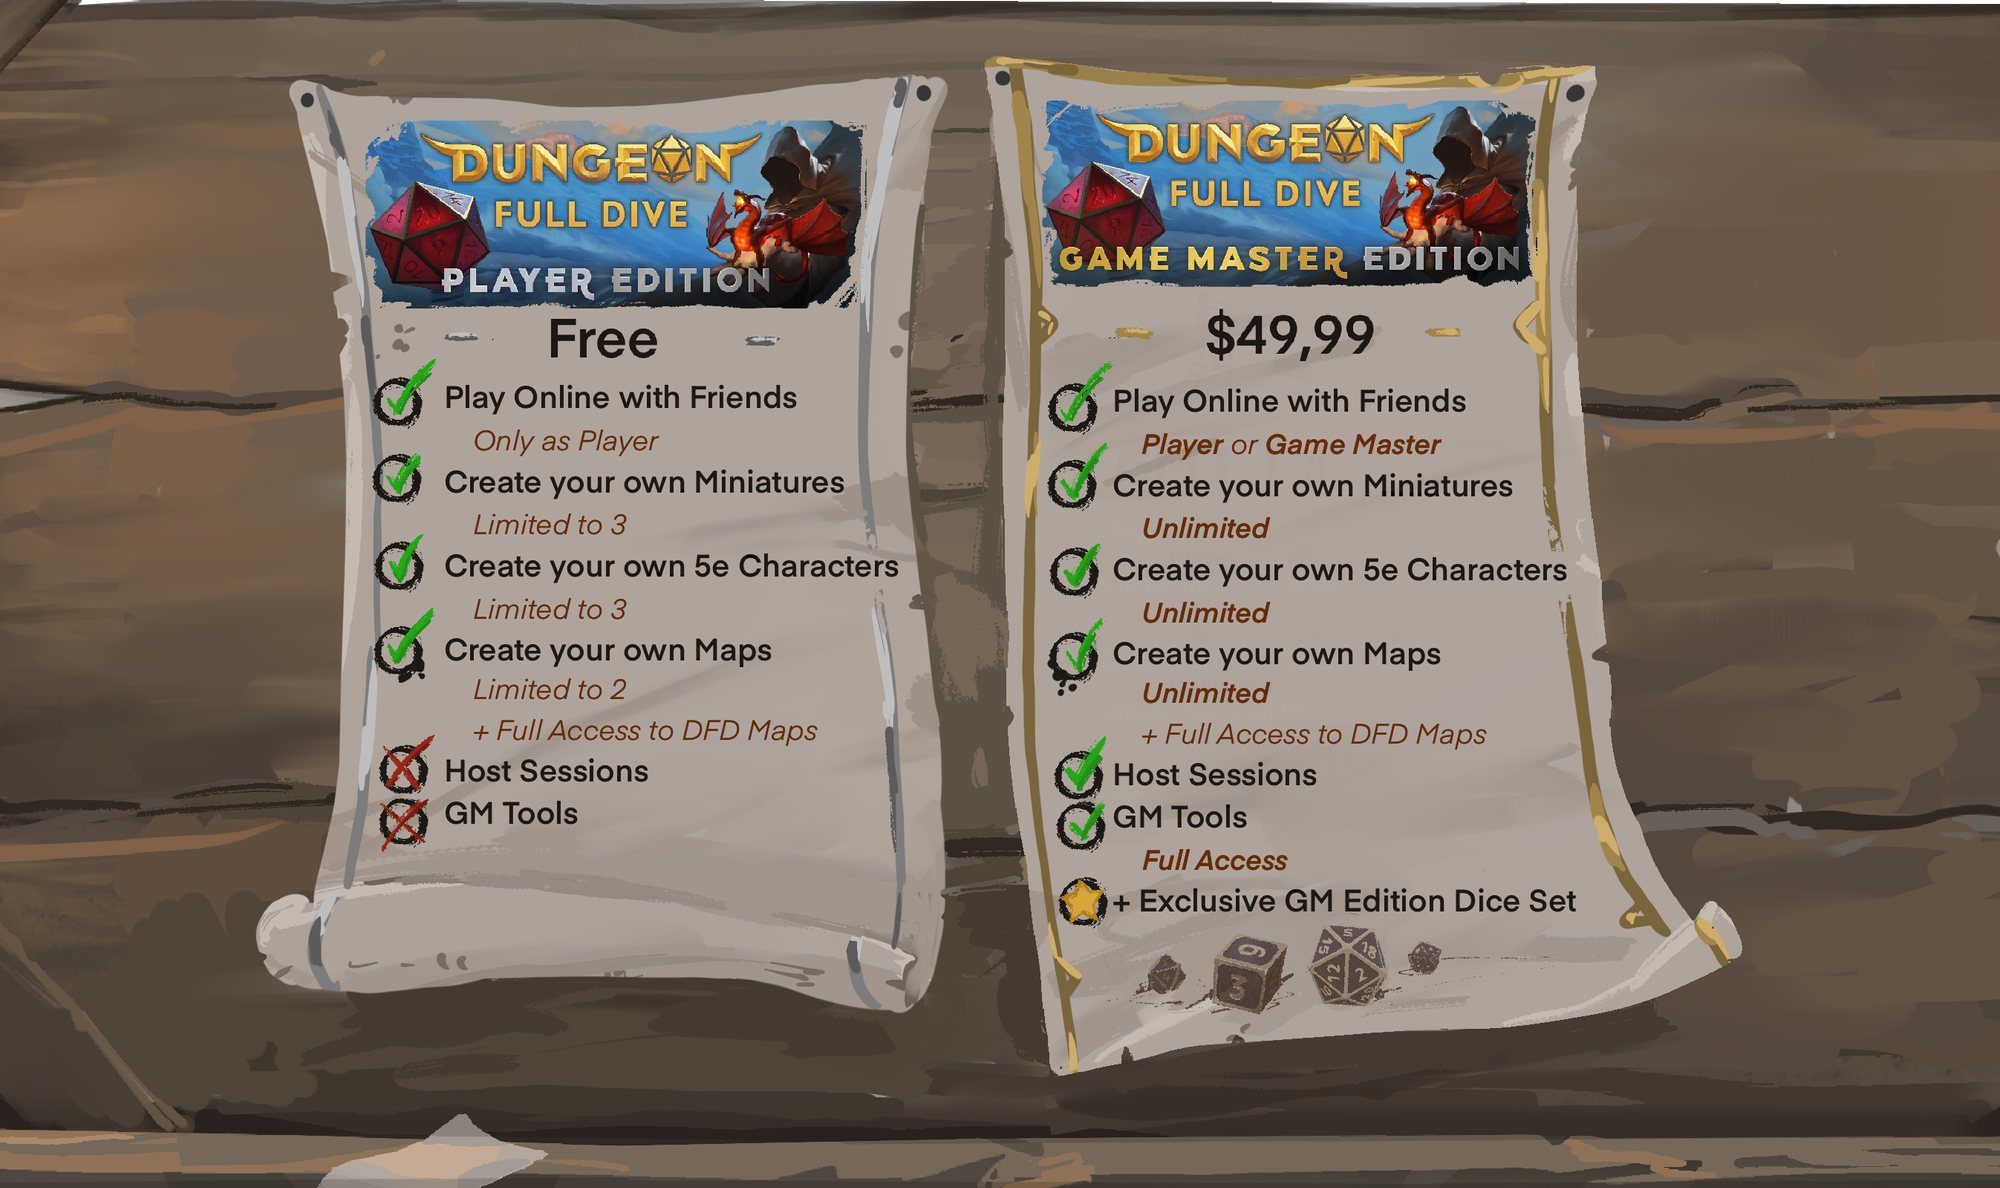 Dungeon Full Dive Goes Free For Players, $50 For GMs